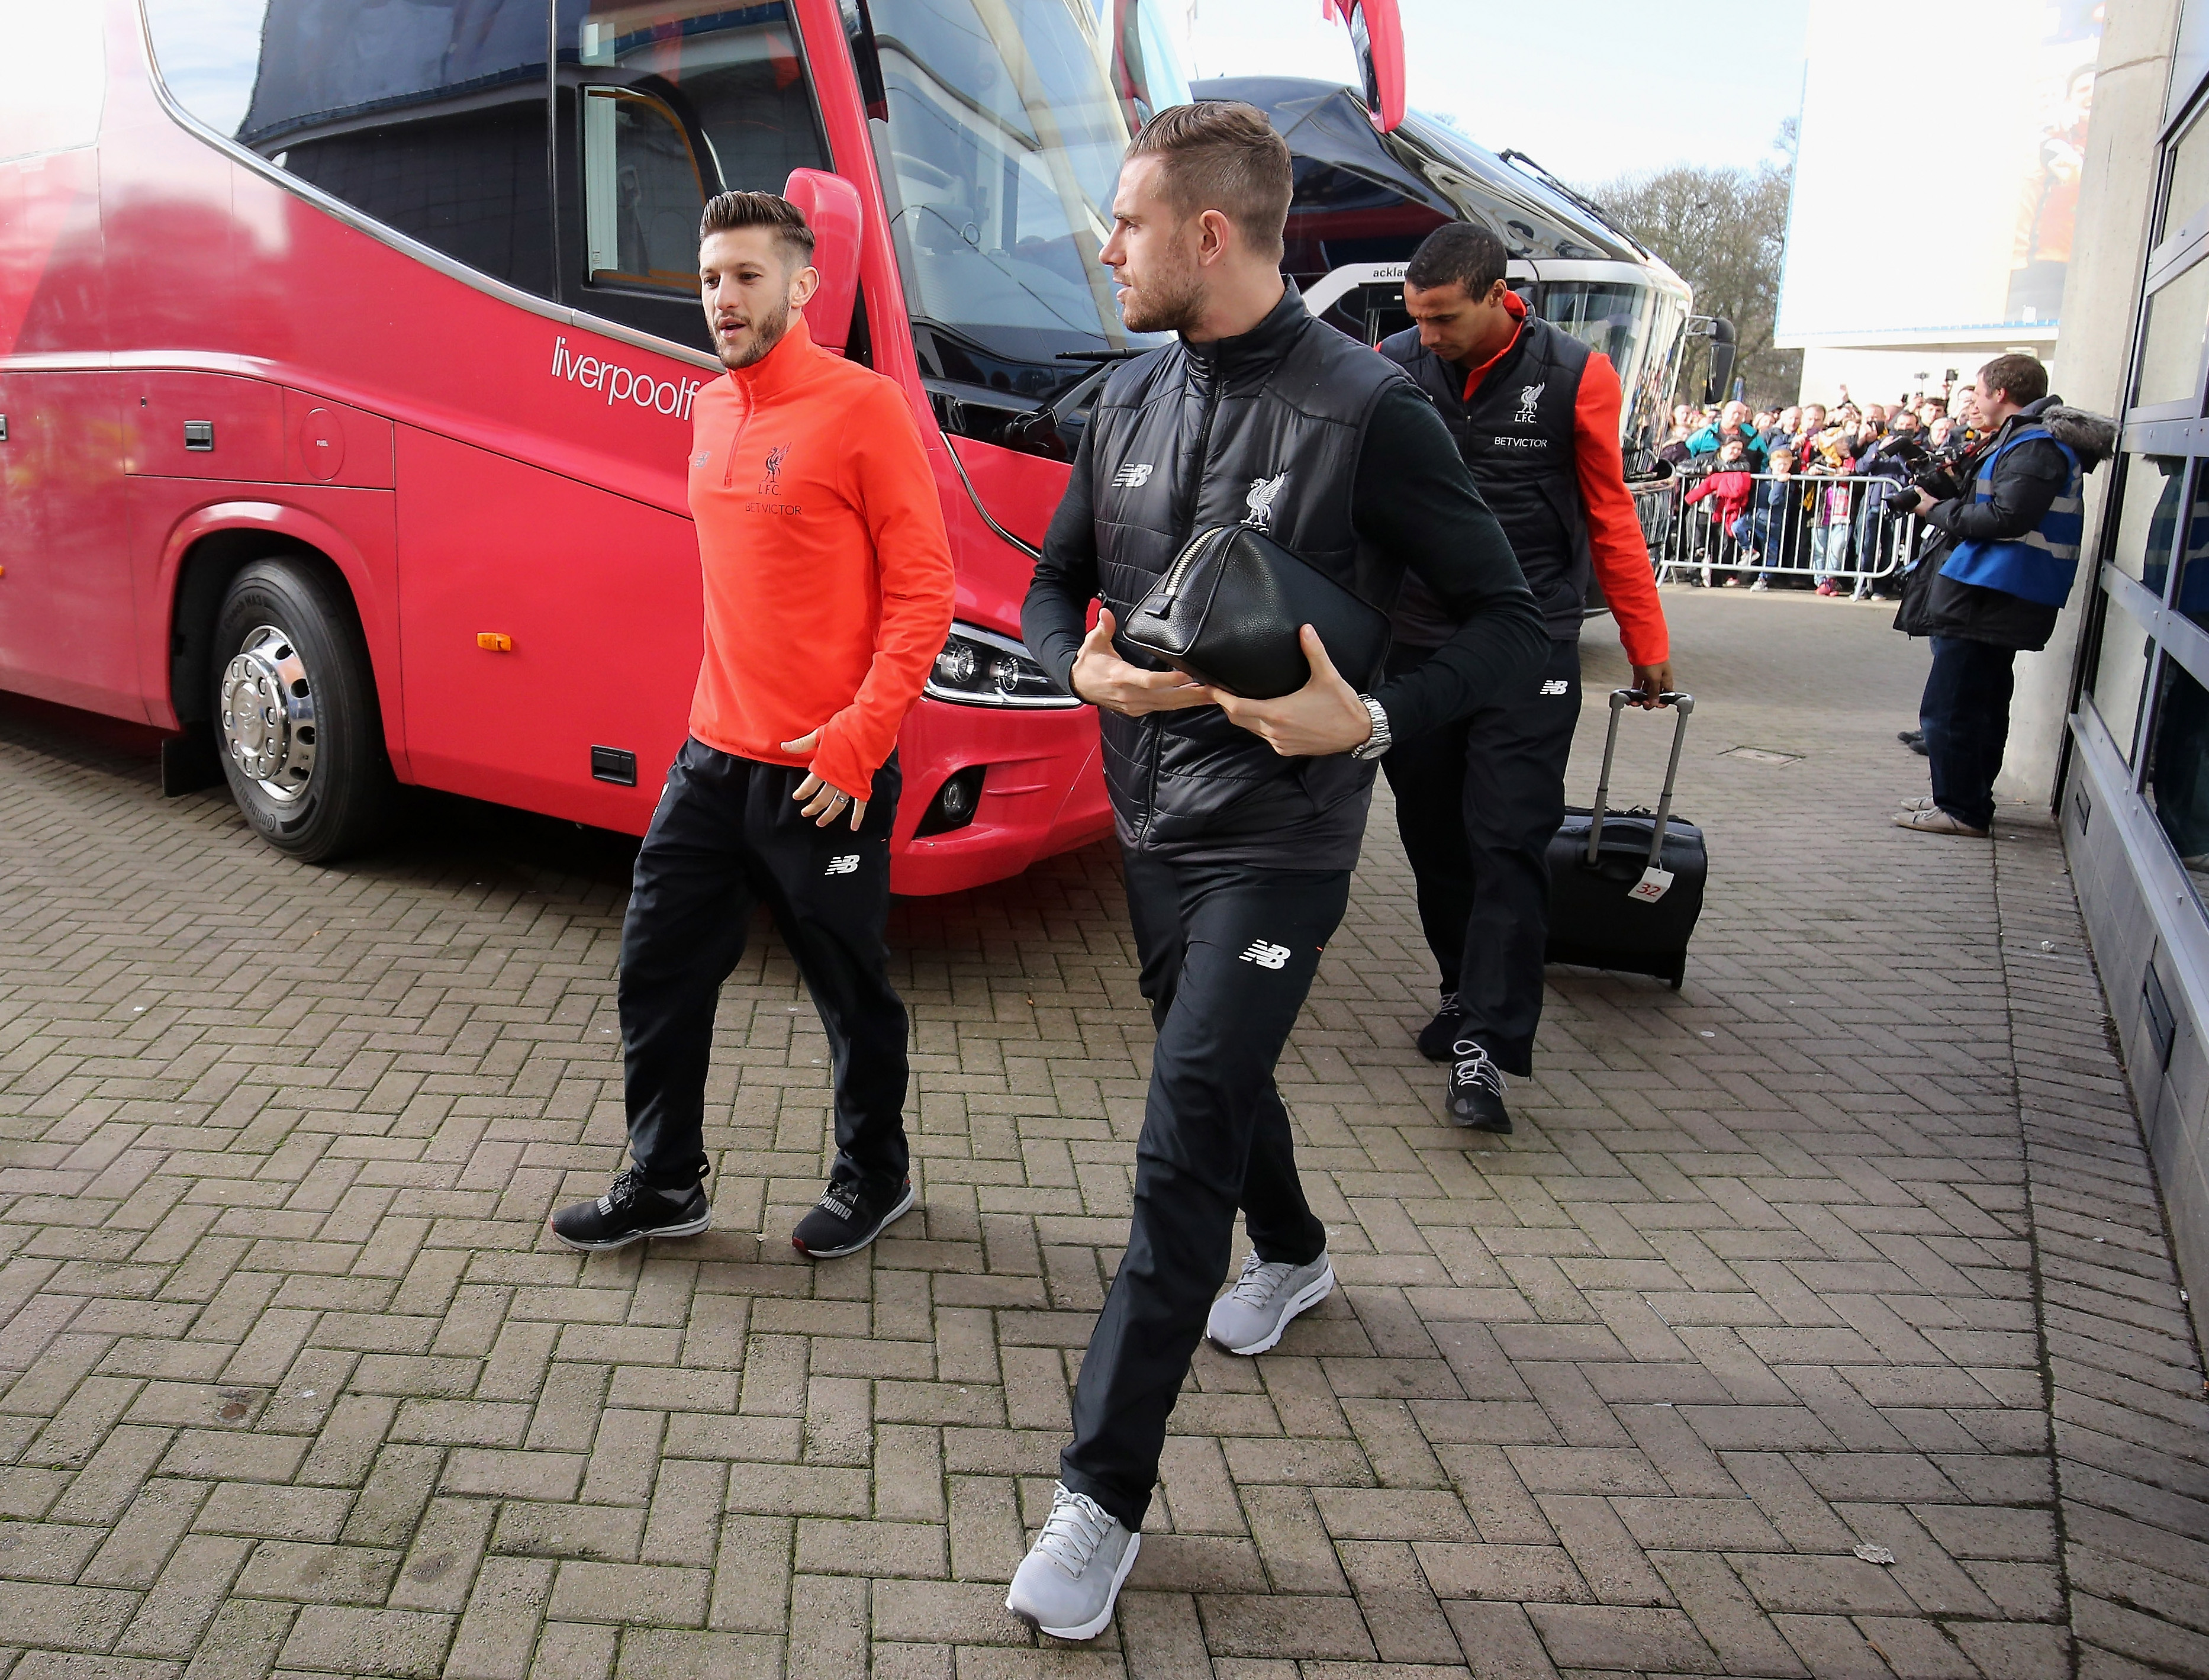 HULL, ENGLAND - FEBRUARY 04:  Adam Lallana (L) and Jordan Henderson (R) of Liverpool are seen on arrival at the stadium prior to the Premier League match between Hull City and Liverpool at KCOM Stadium on February 4, 2017 in Hull, England.  (Photo by Nigel Roddis/Getty Images)